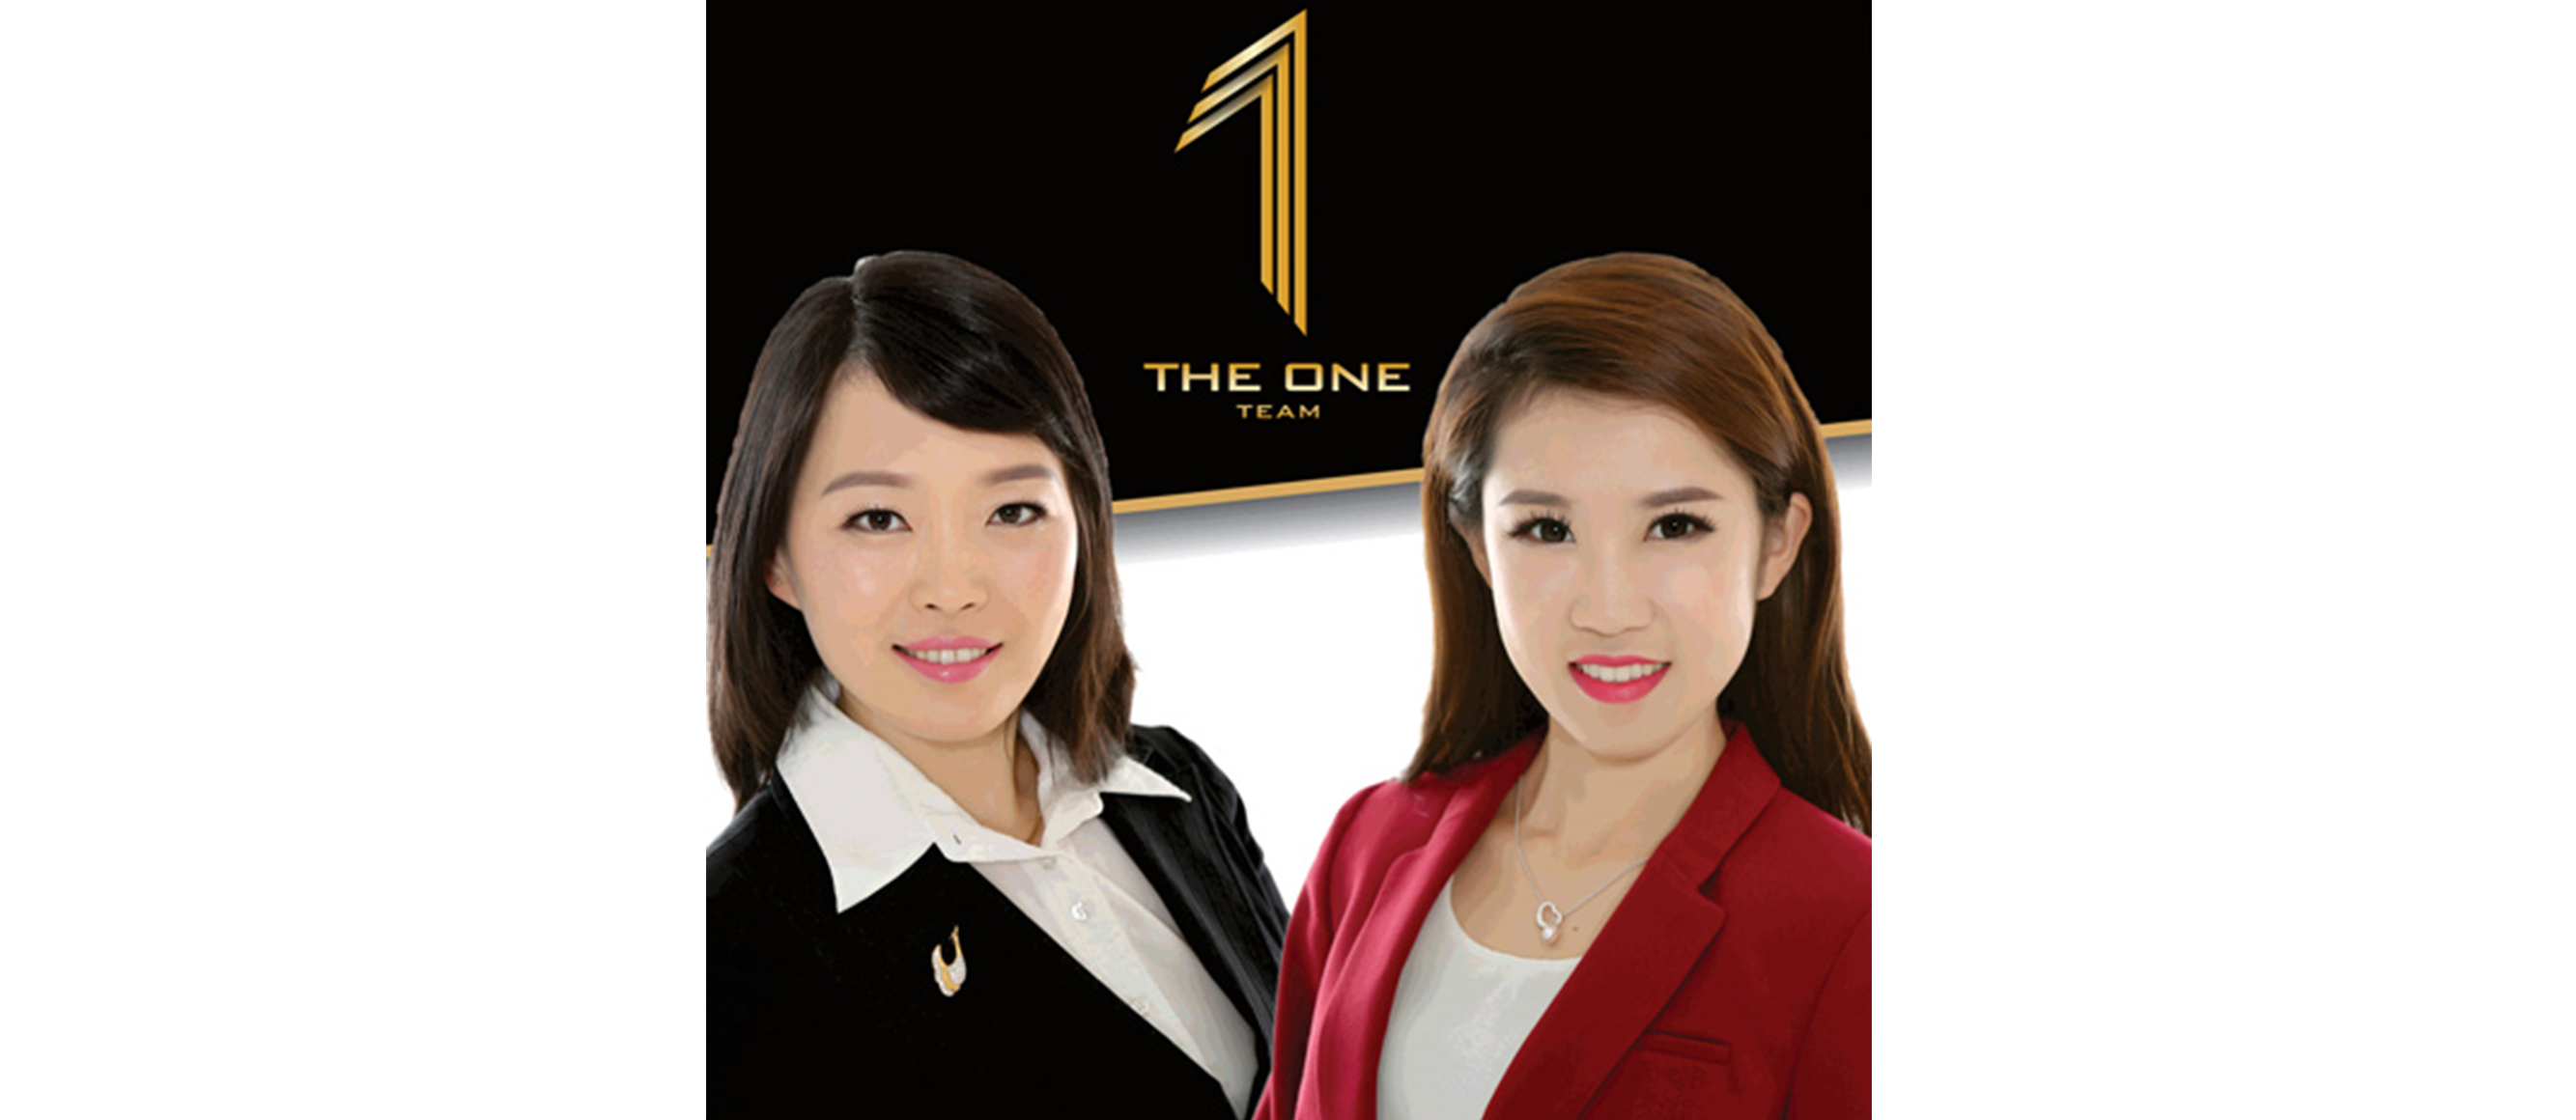 New Franchise: CENTURY 21 The One